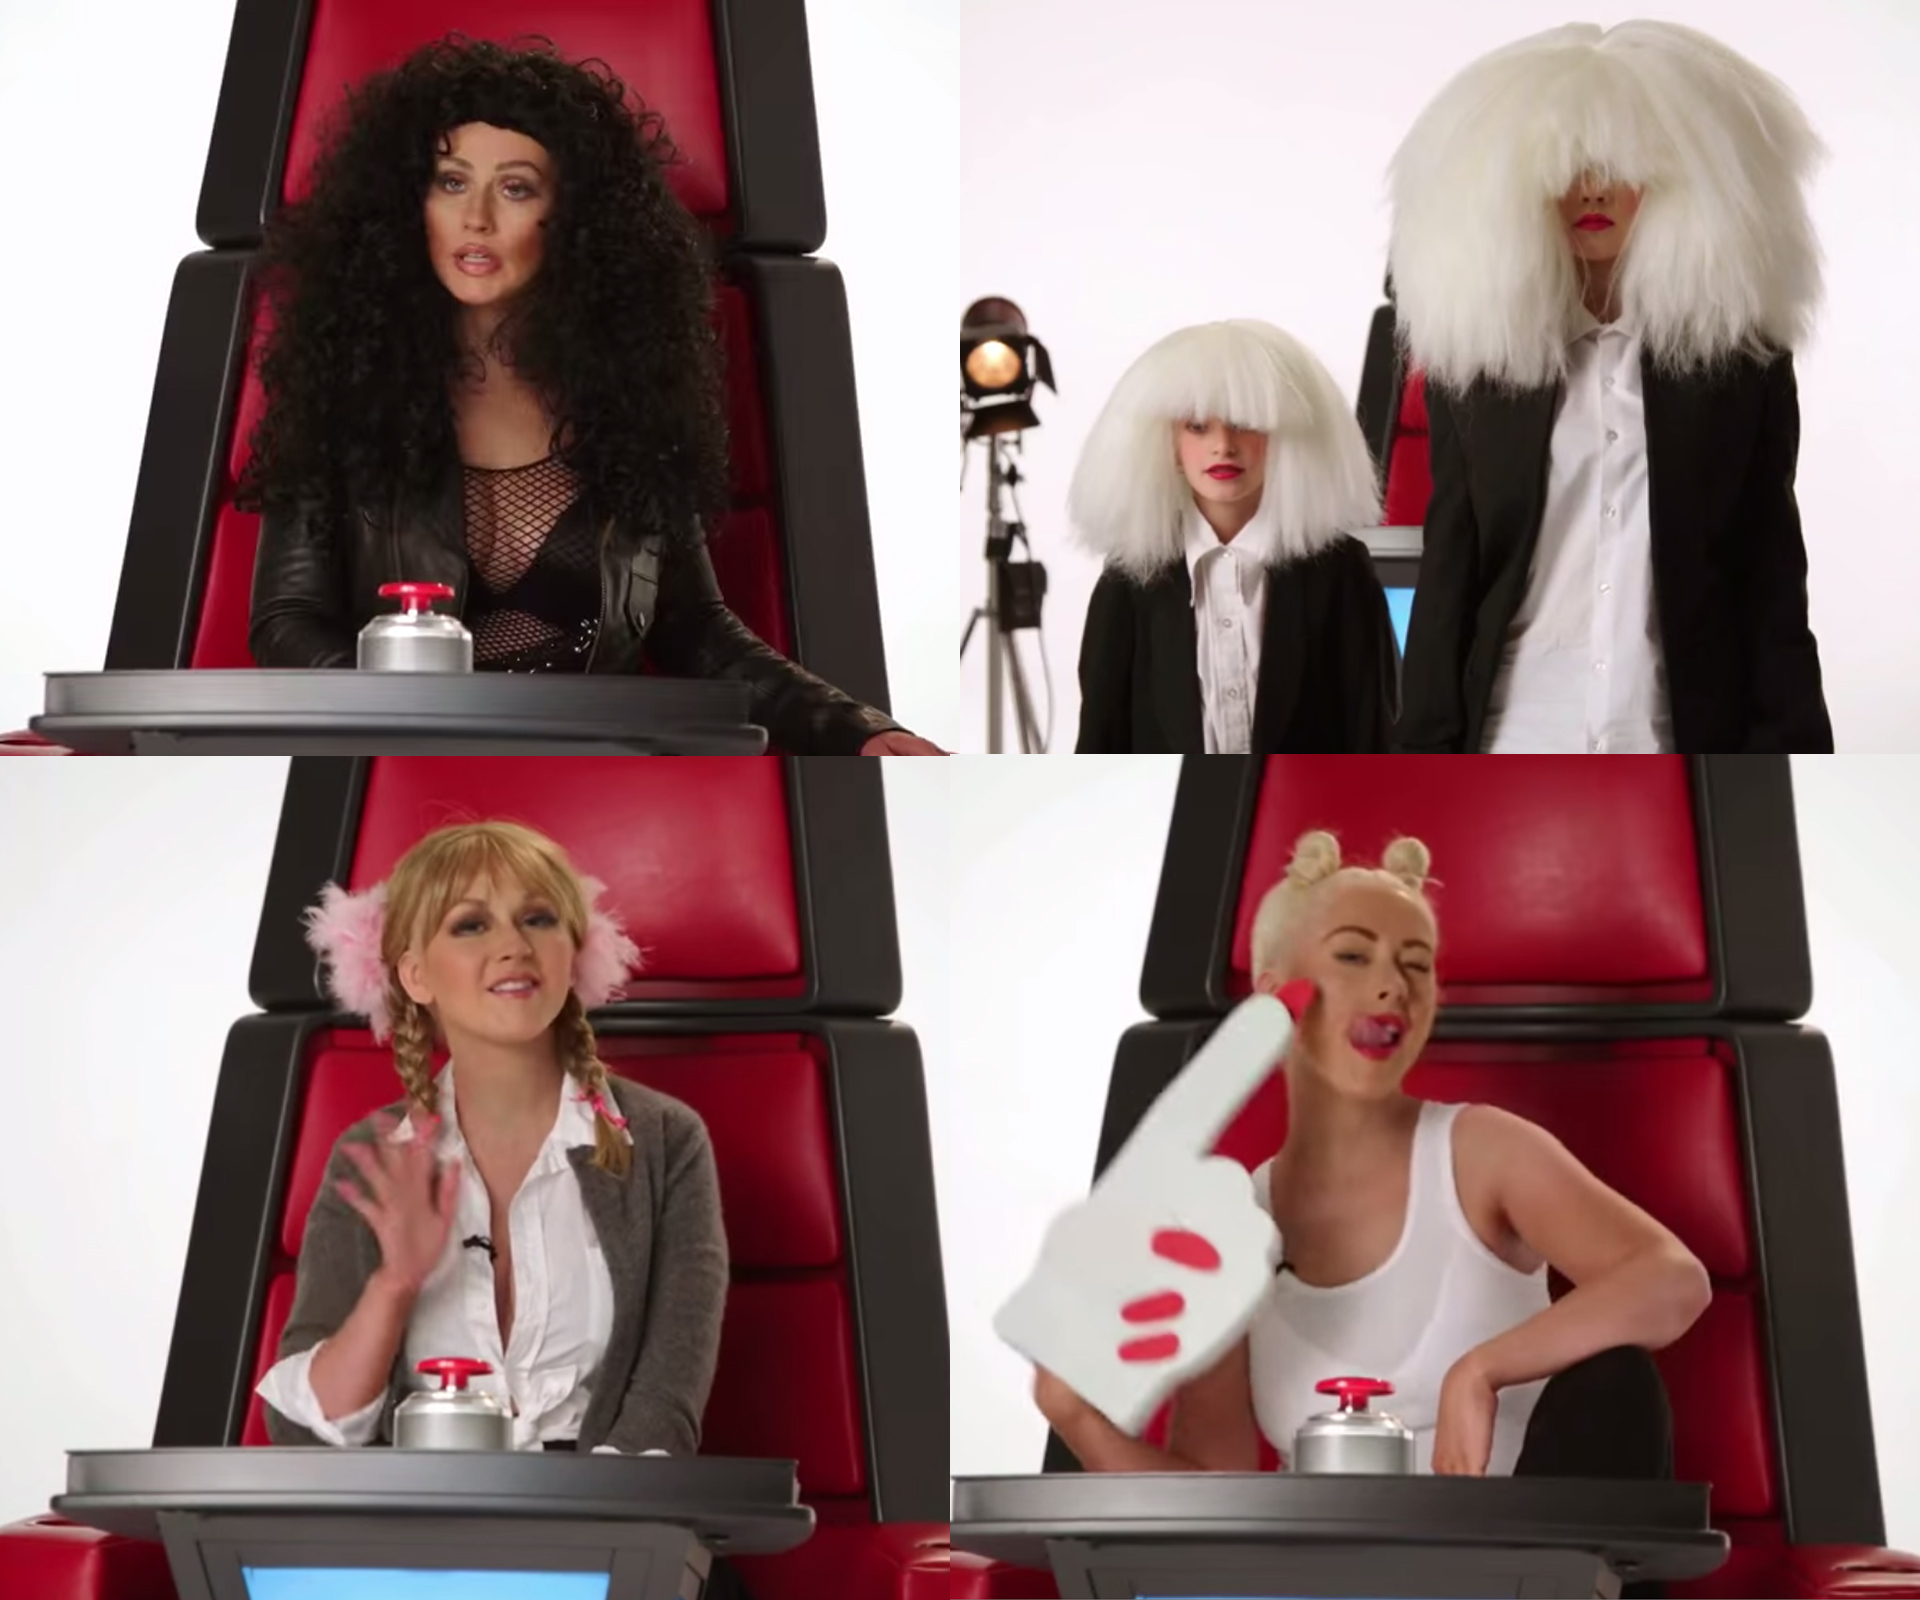 WATCH: Christina Aguilera nails these celebrity impersonations